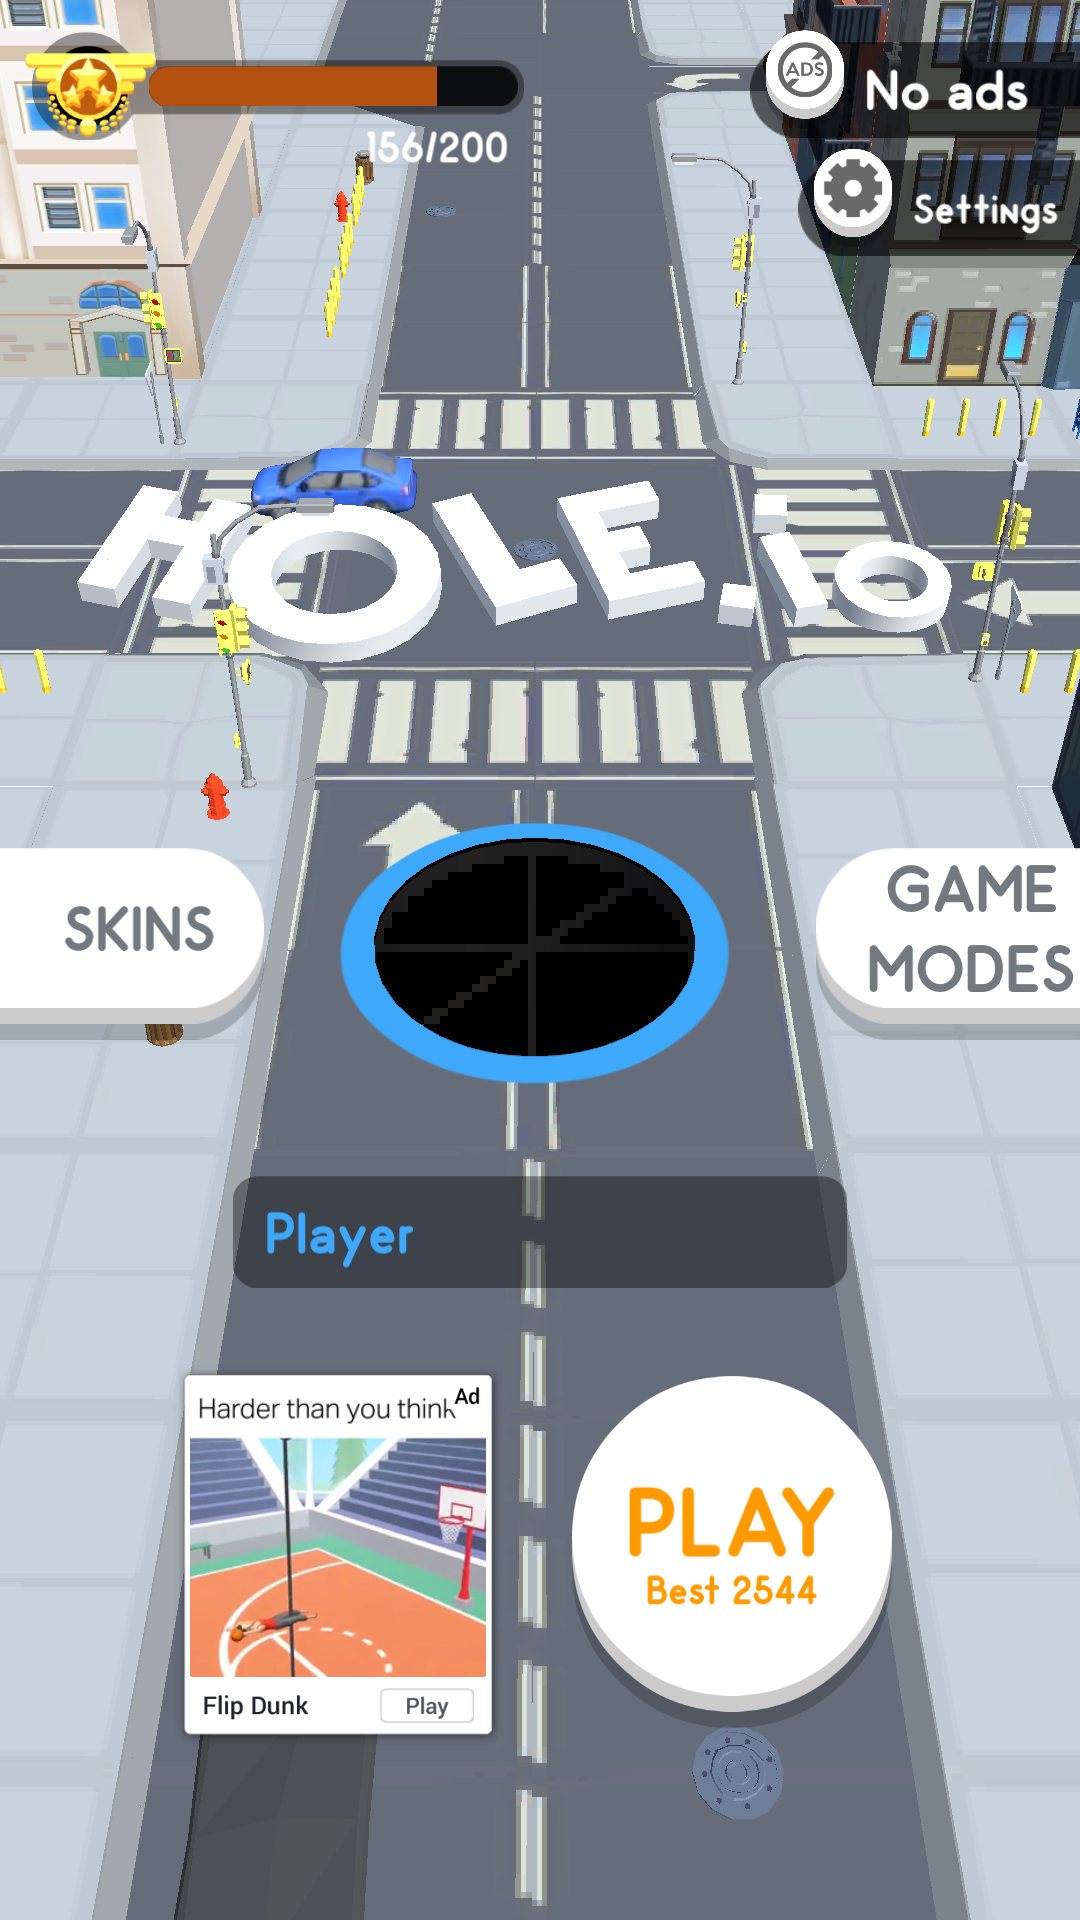 Game Review: Hole.io (Mobile - Free to Play) - GAMES, BRRRAAAINS